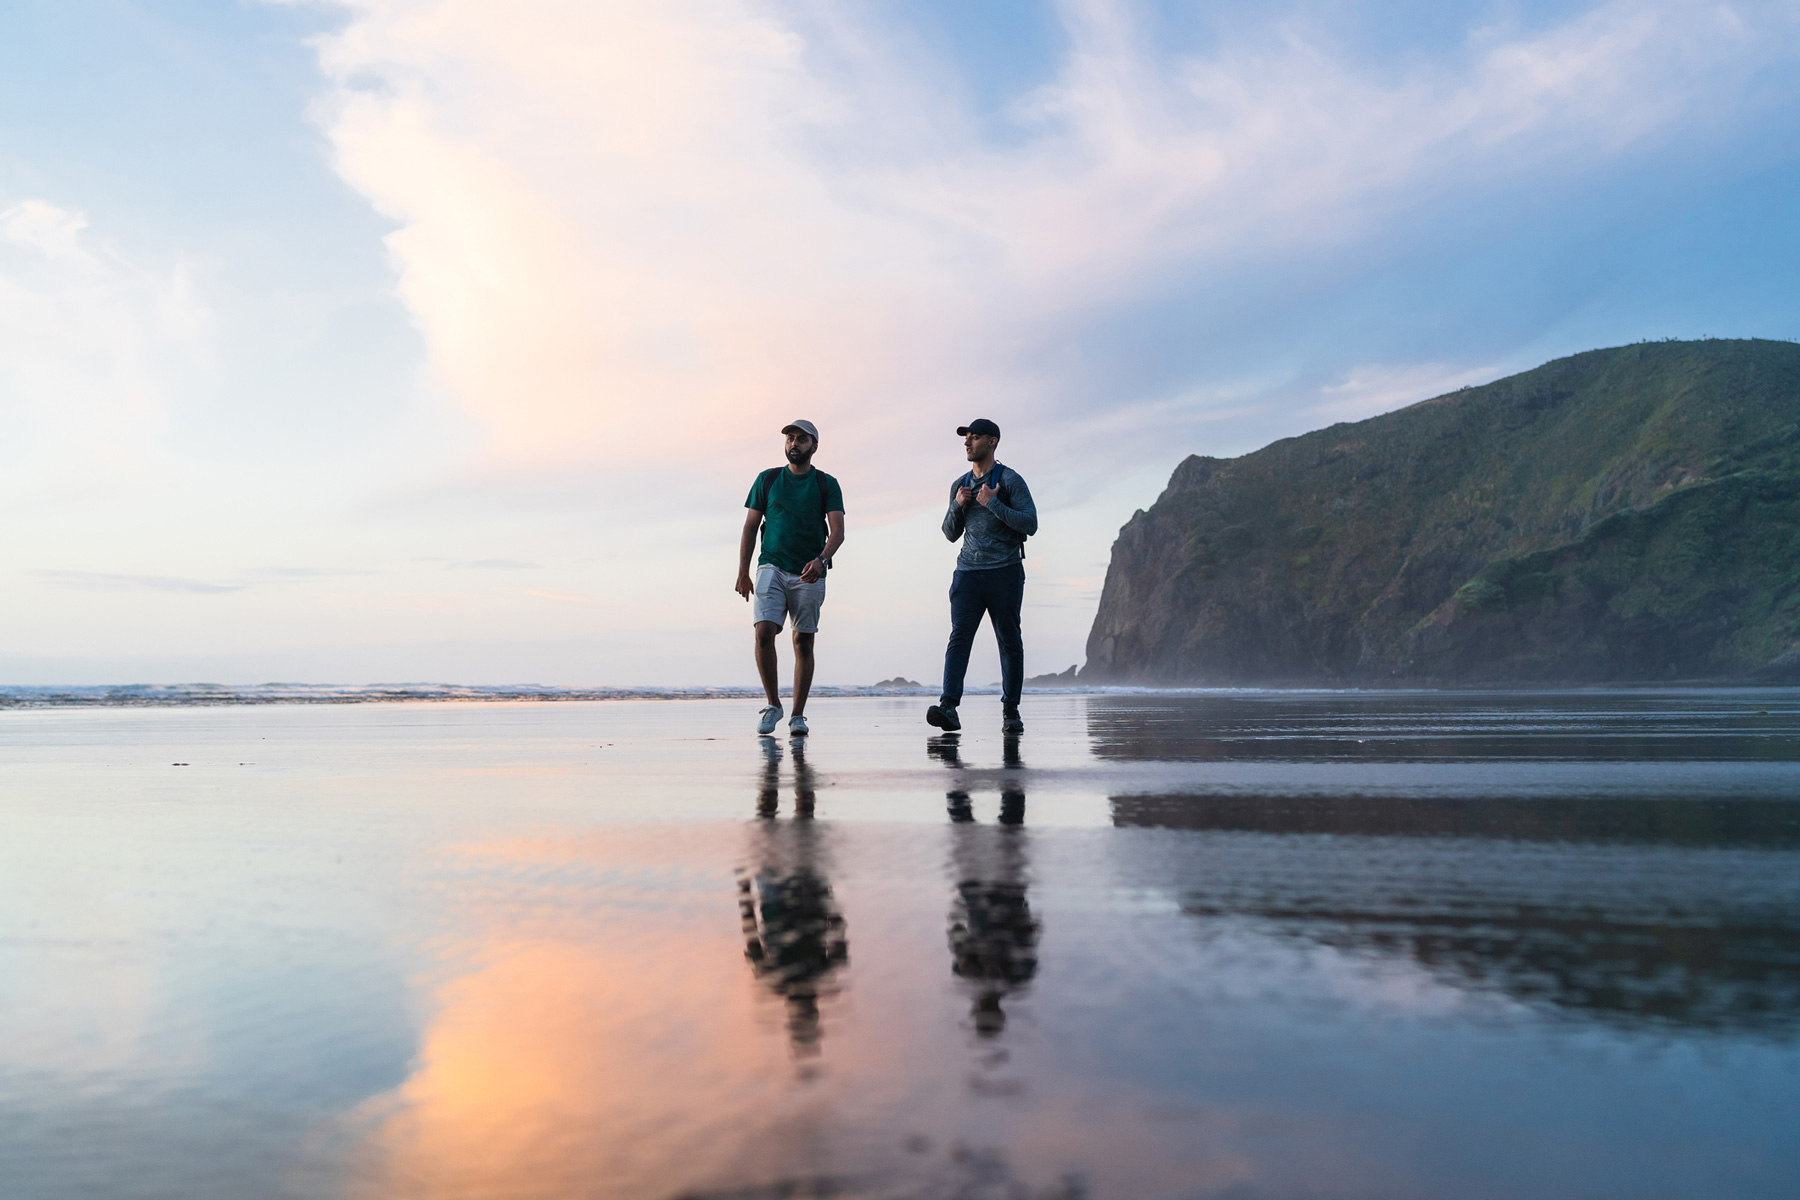 Two males in active wear walking along a kiwi beach at golden hour